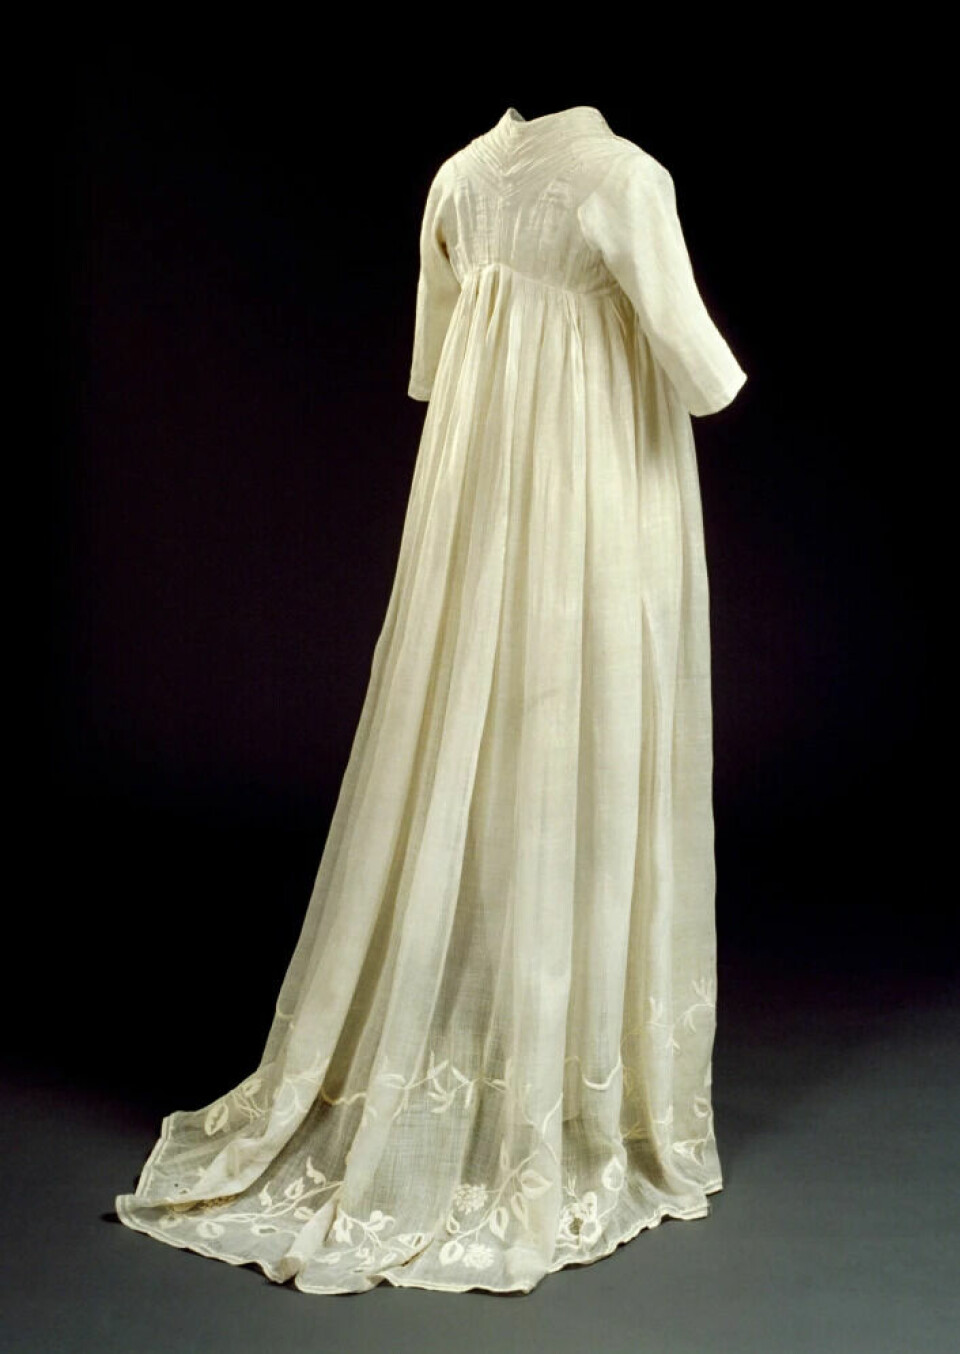 Wedding dress from 1797, made of nettle fabric.